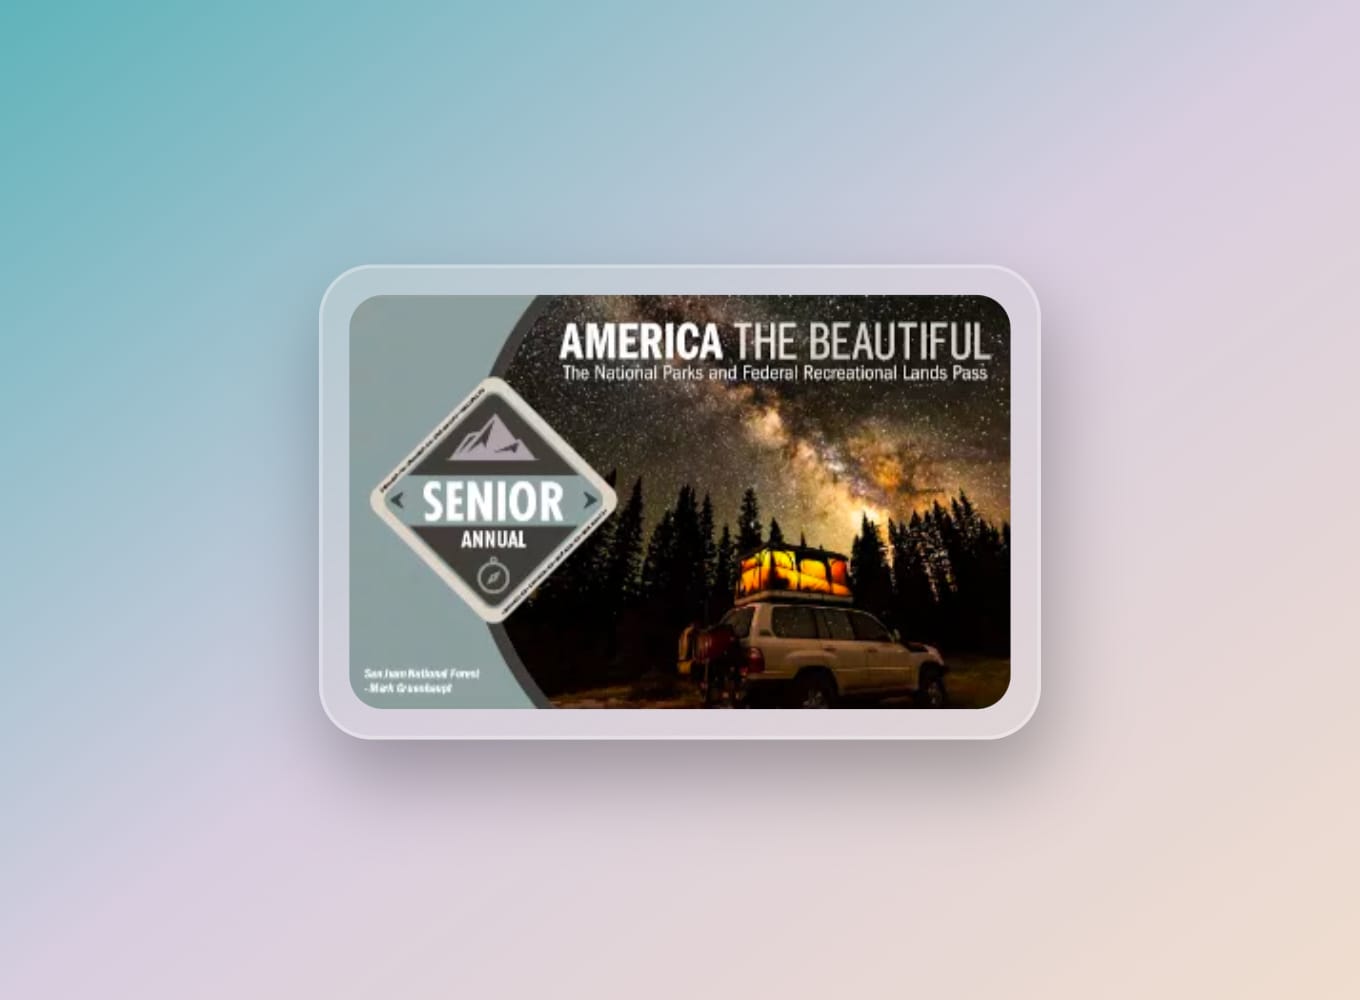 Senior Annual America the Beautiful National Parks Pass